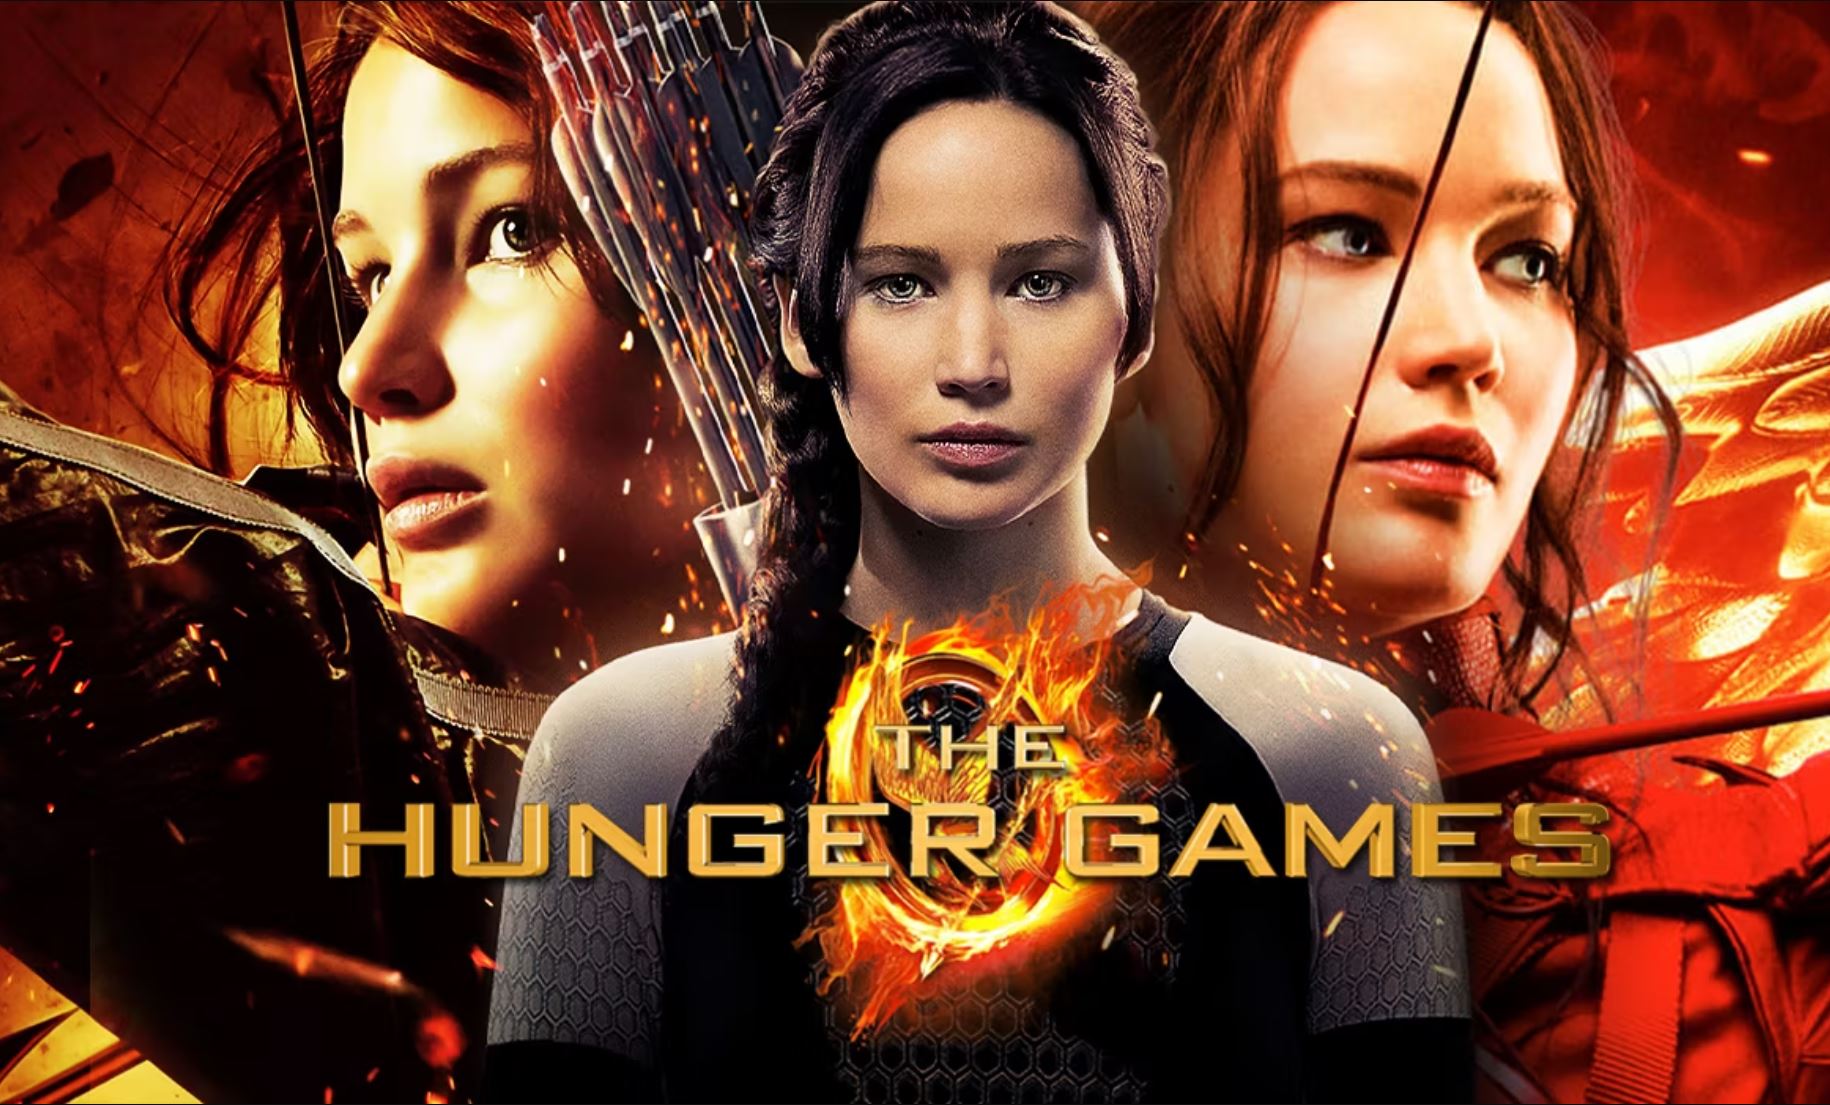 How to Watch The Hunger Games Series On Netflix from Anywhere?